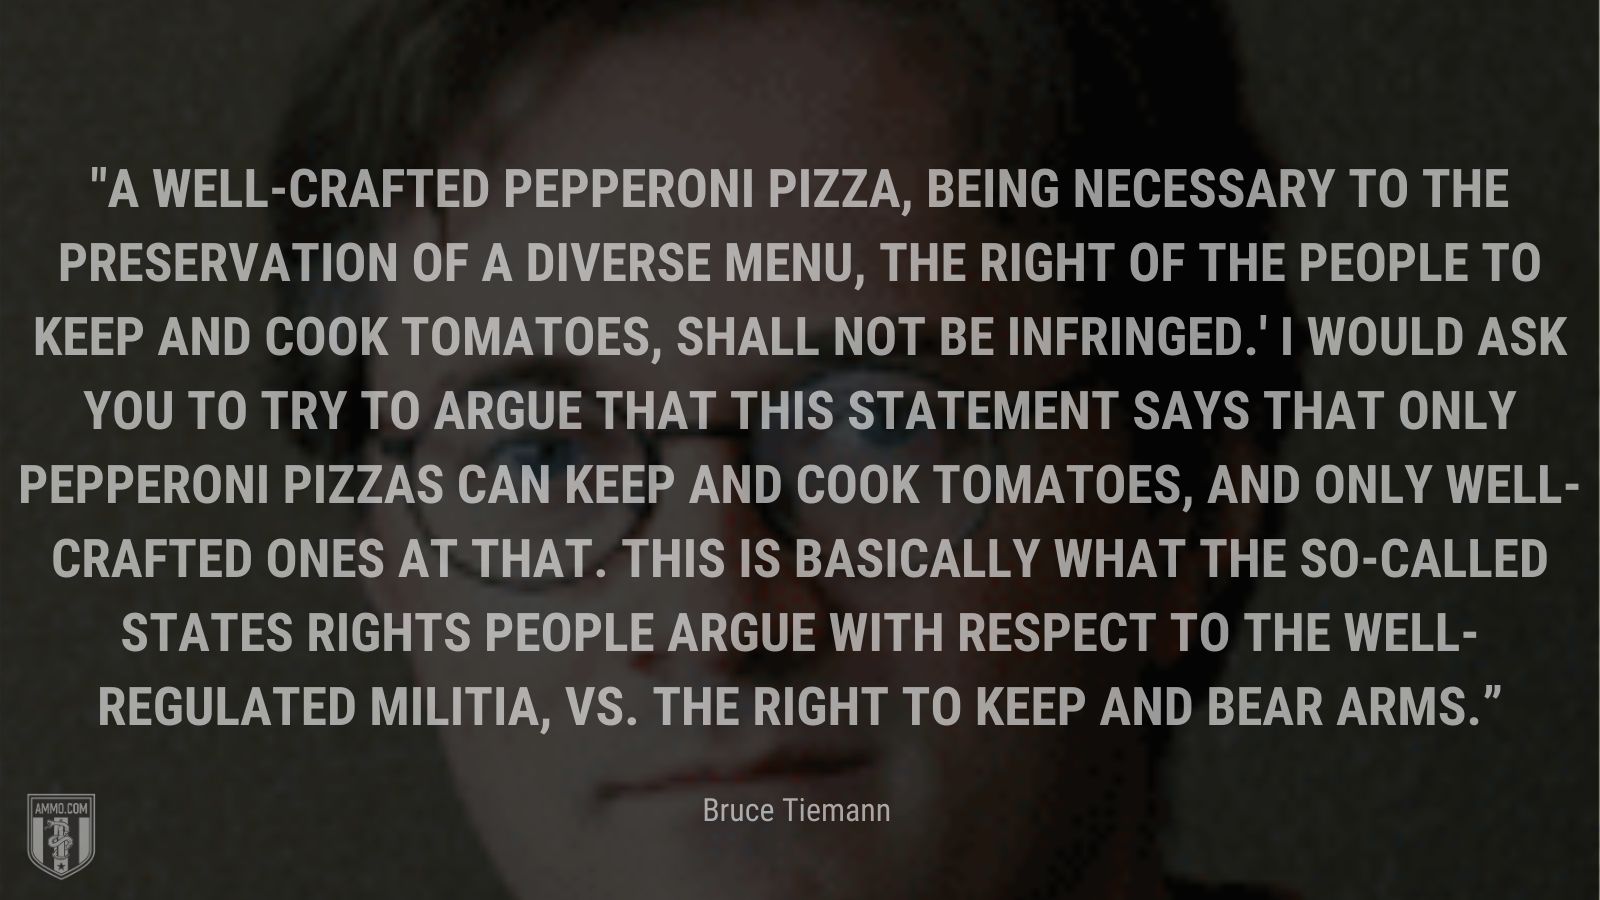 “A well-crafted pepperoni pizza, being necessary to the preservation of a diverse menu, the right of the people to keep and cook tomatoes, shall not be infringed.' I would ask you to try to argue that this statement says that only pepperoni pizzas can keep and cook tomatoes, and only well-crafted ones at that. This is basically what the so-called states rights people argue with respect to the well-regulated militia, vs. the right to keep and bear arms.” - Bruce Tiemann